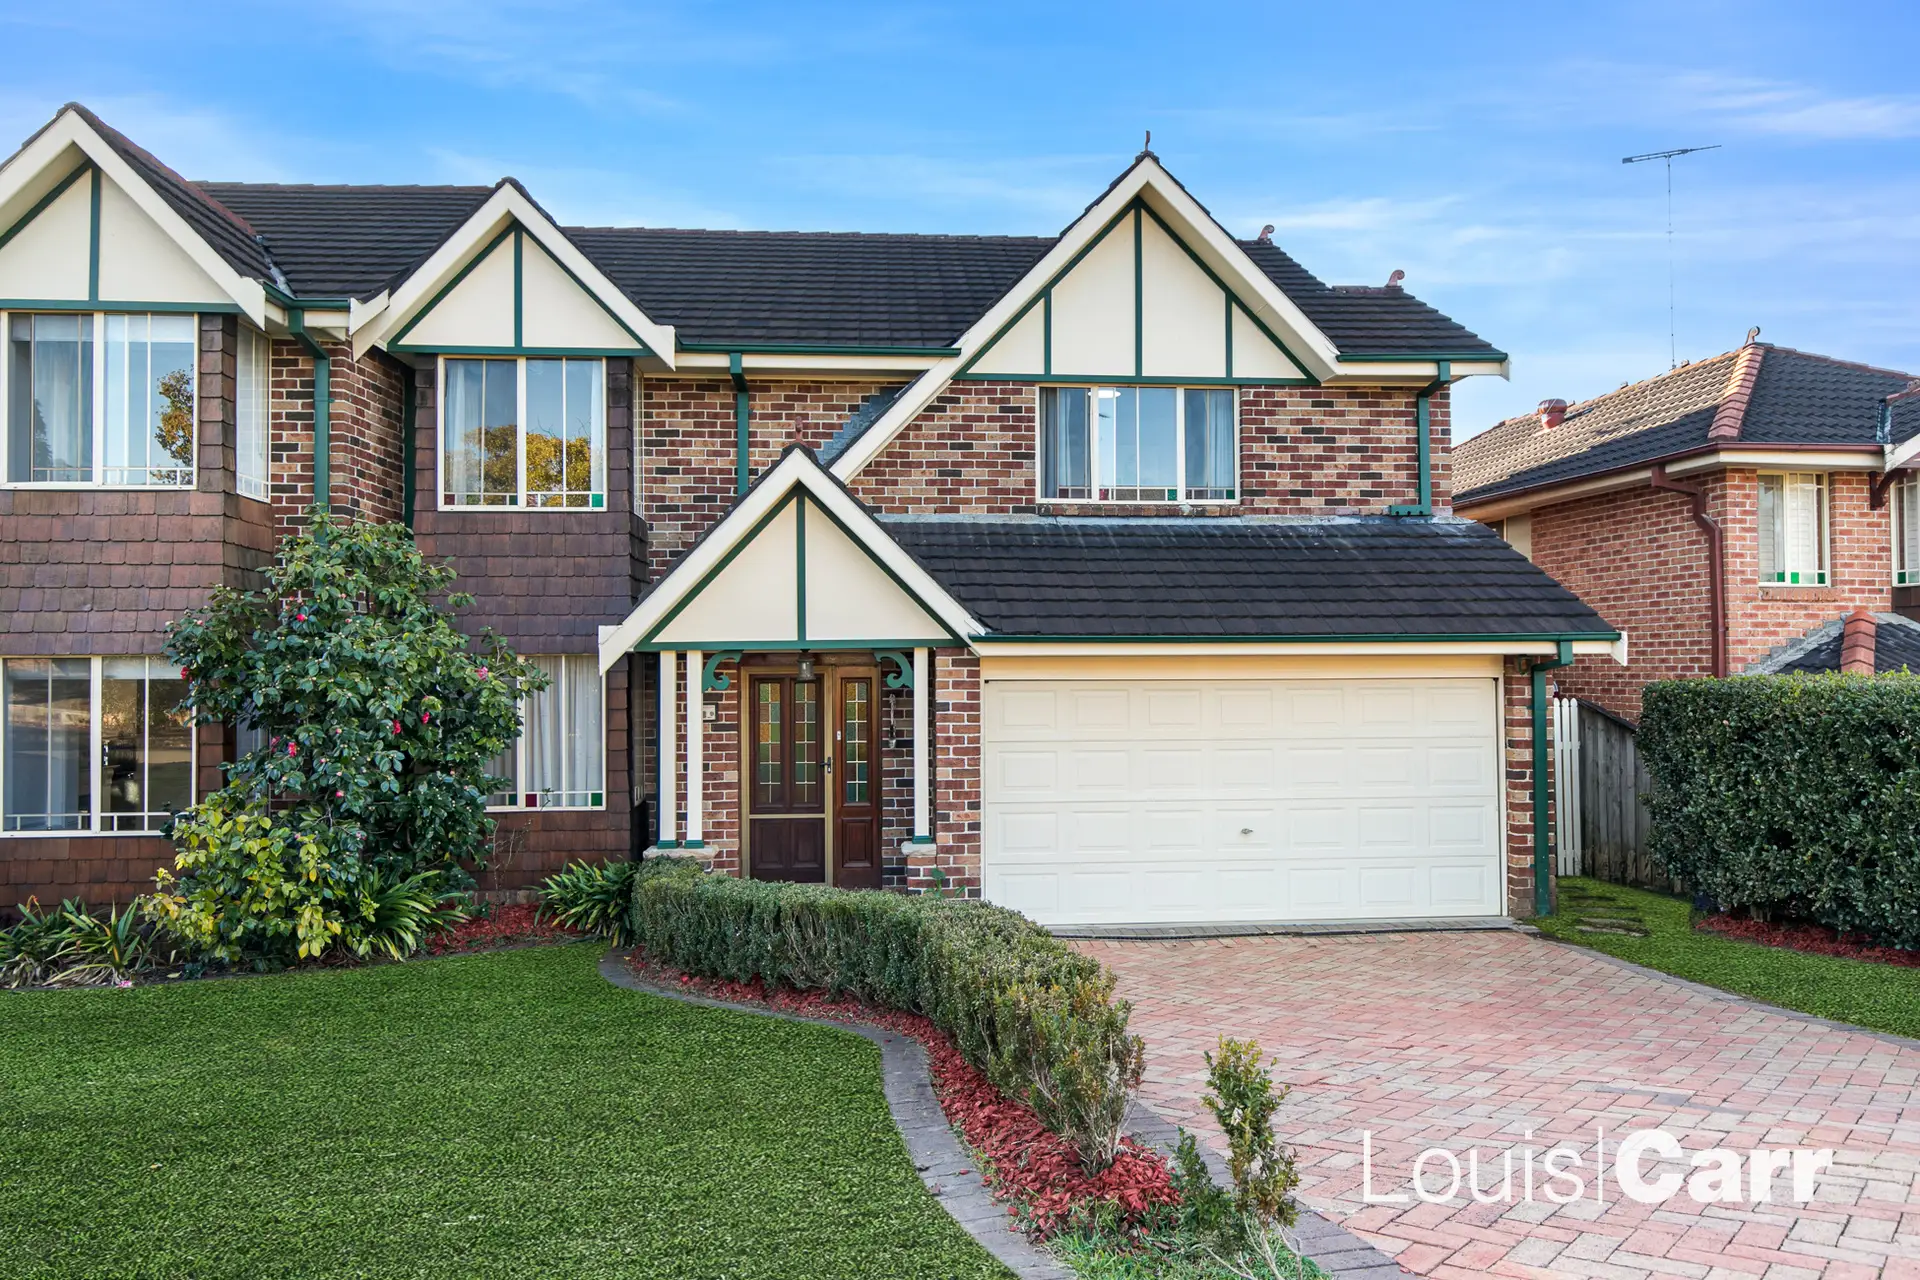 Photo #1: 16B Darlington Drive, Cherrybrook - Sold by Louis Carr Real Estate